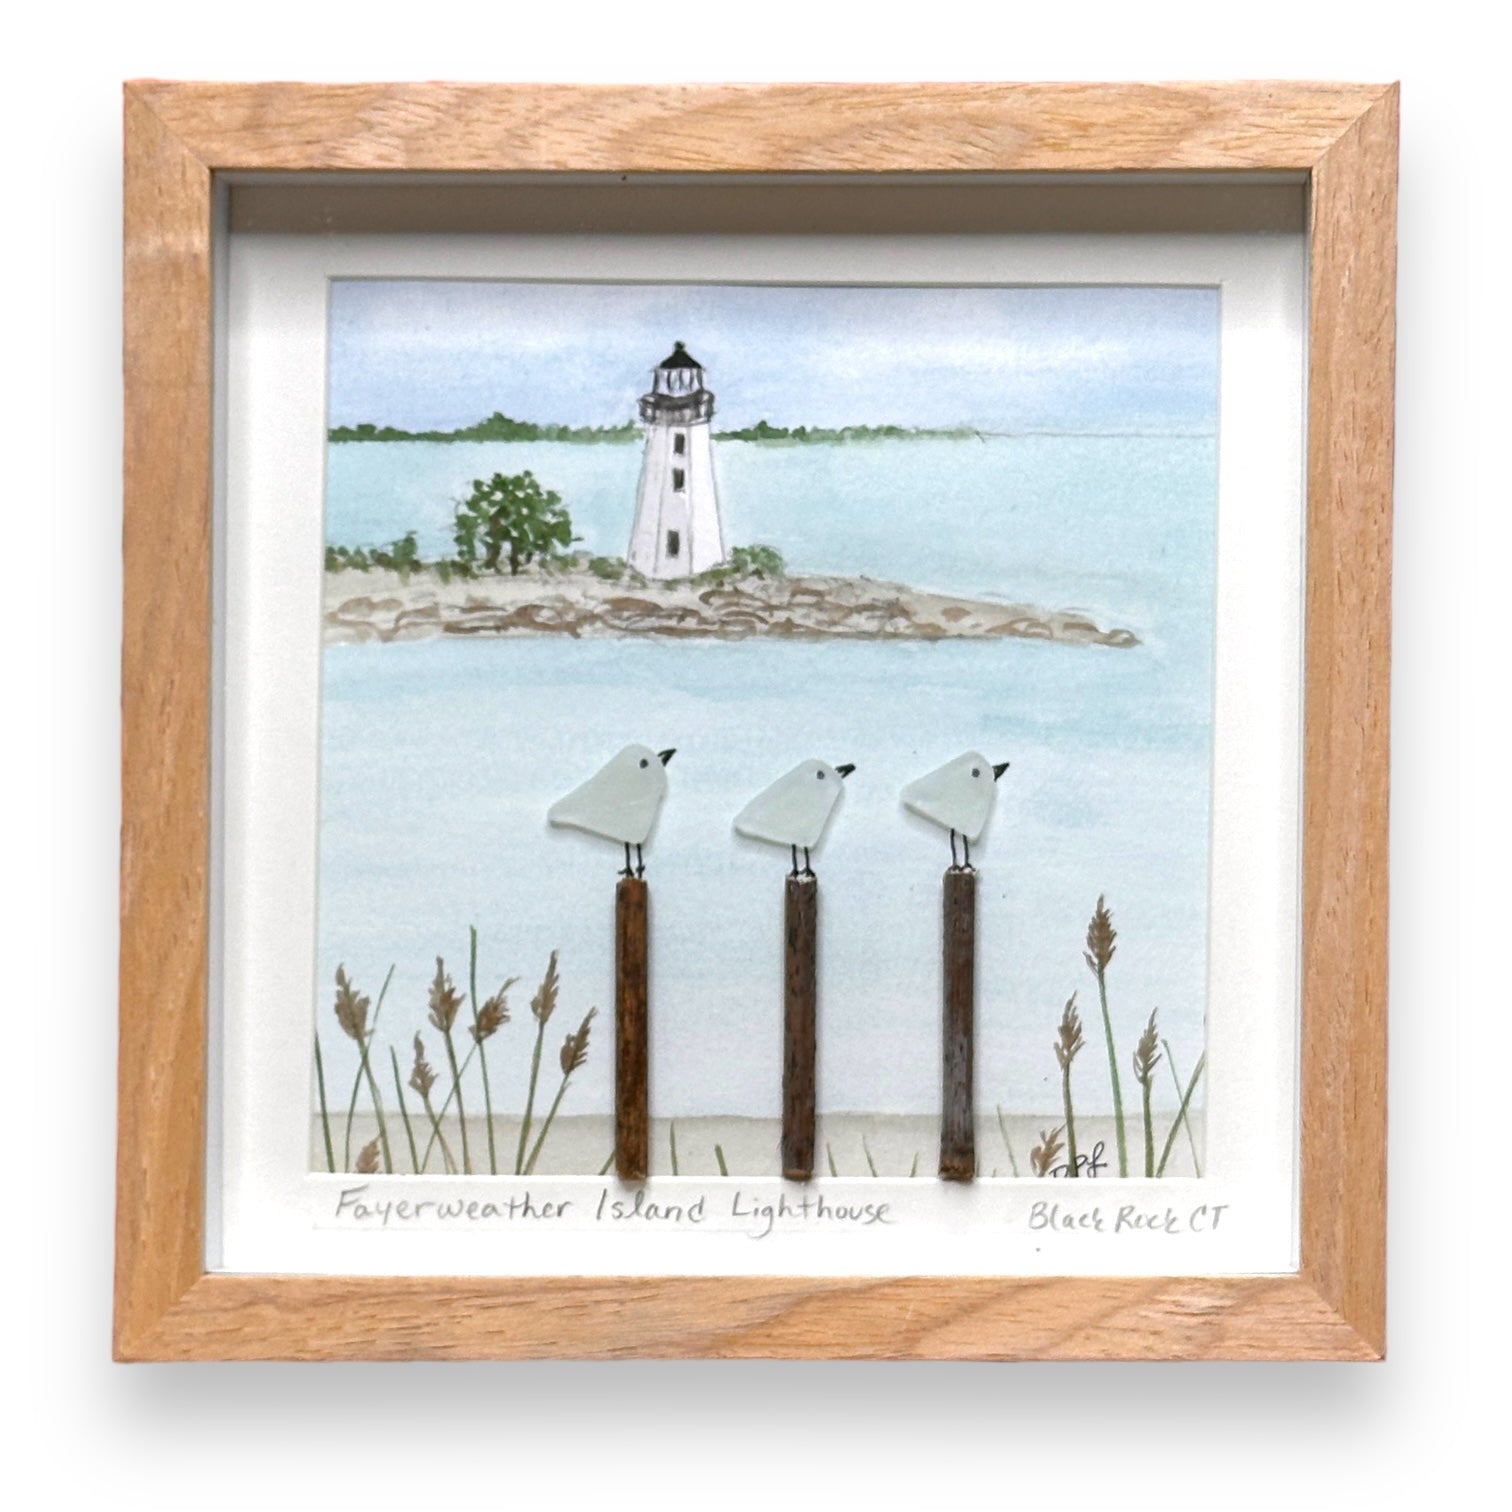 Fayerweather Island Lighthouse Black Rock Connecticut Three Sea Glass Birds on Watercolor Print - Deluxe Framed Shadowbox - 8-7/8-in - Mellow Monkey